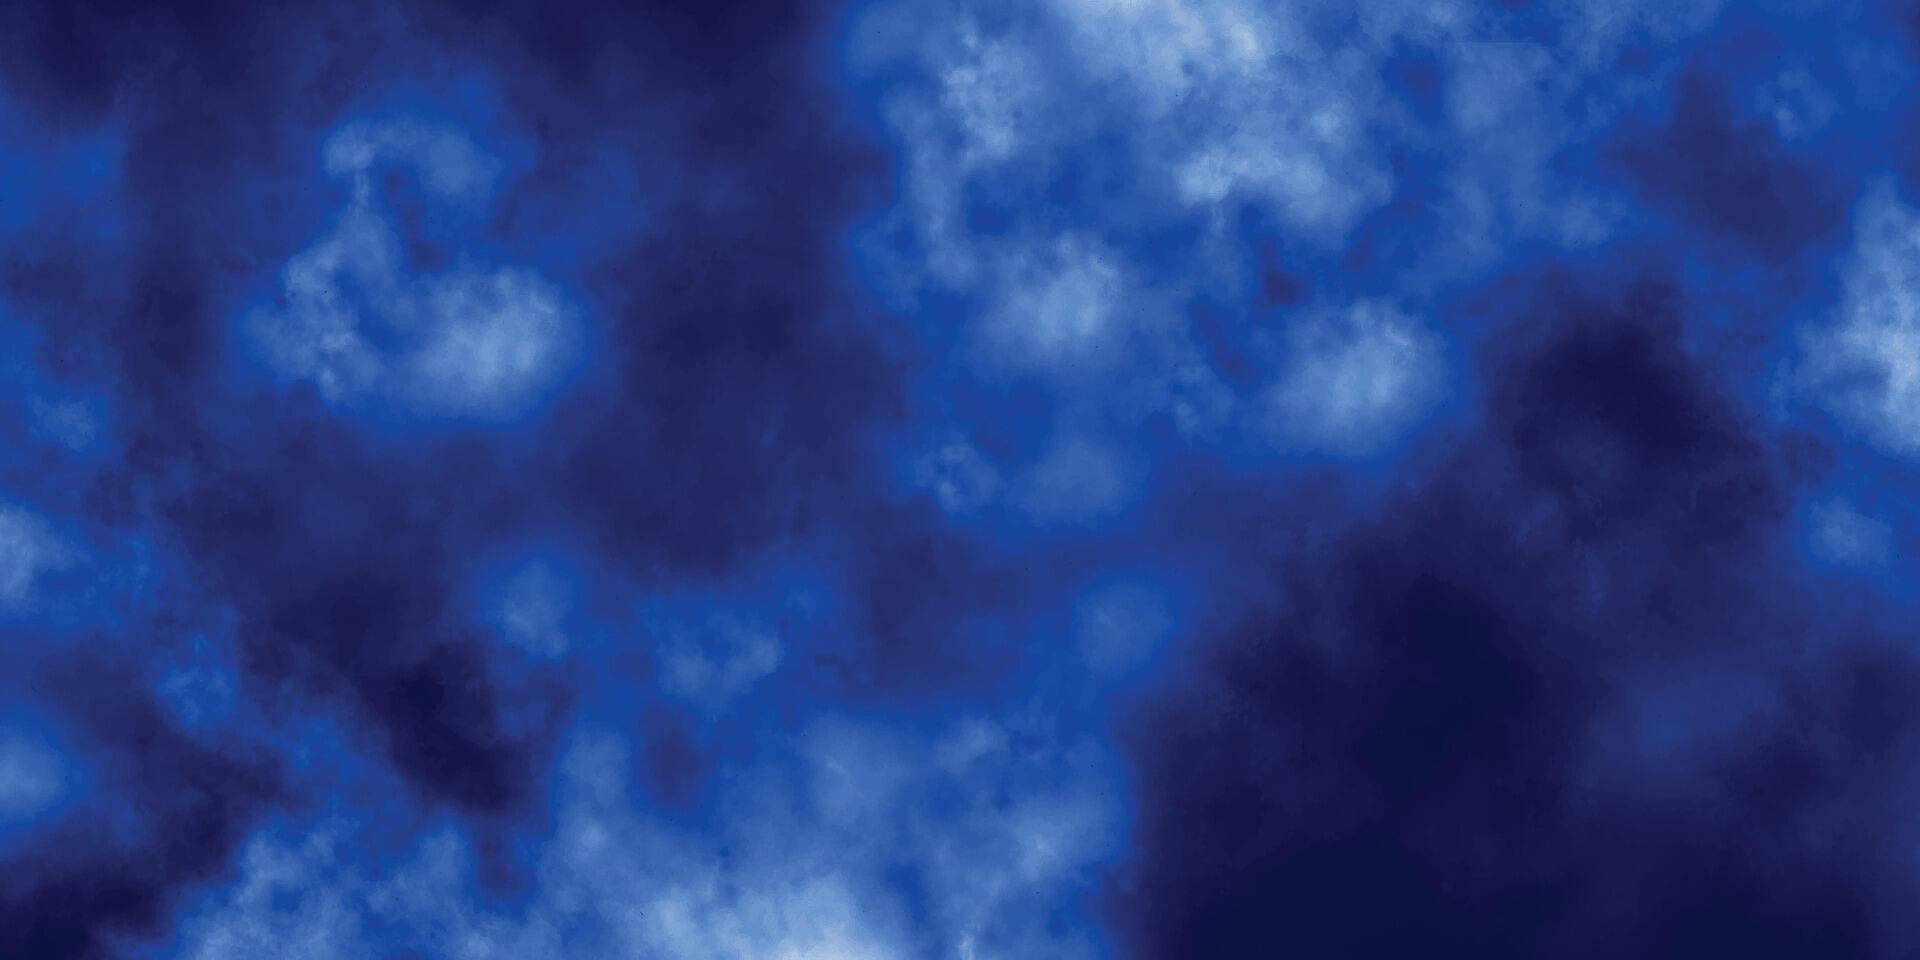 Watercolor background. Blue watercolor texture. Navy blue paint on white background. Blue sky with clouds. vector